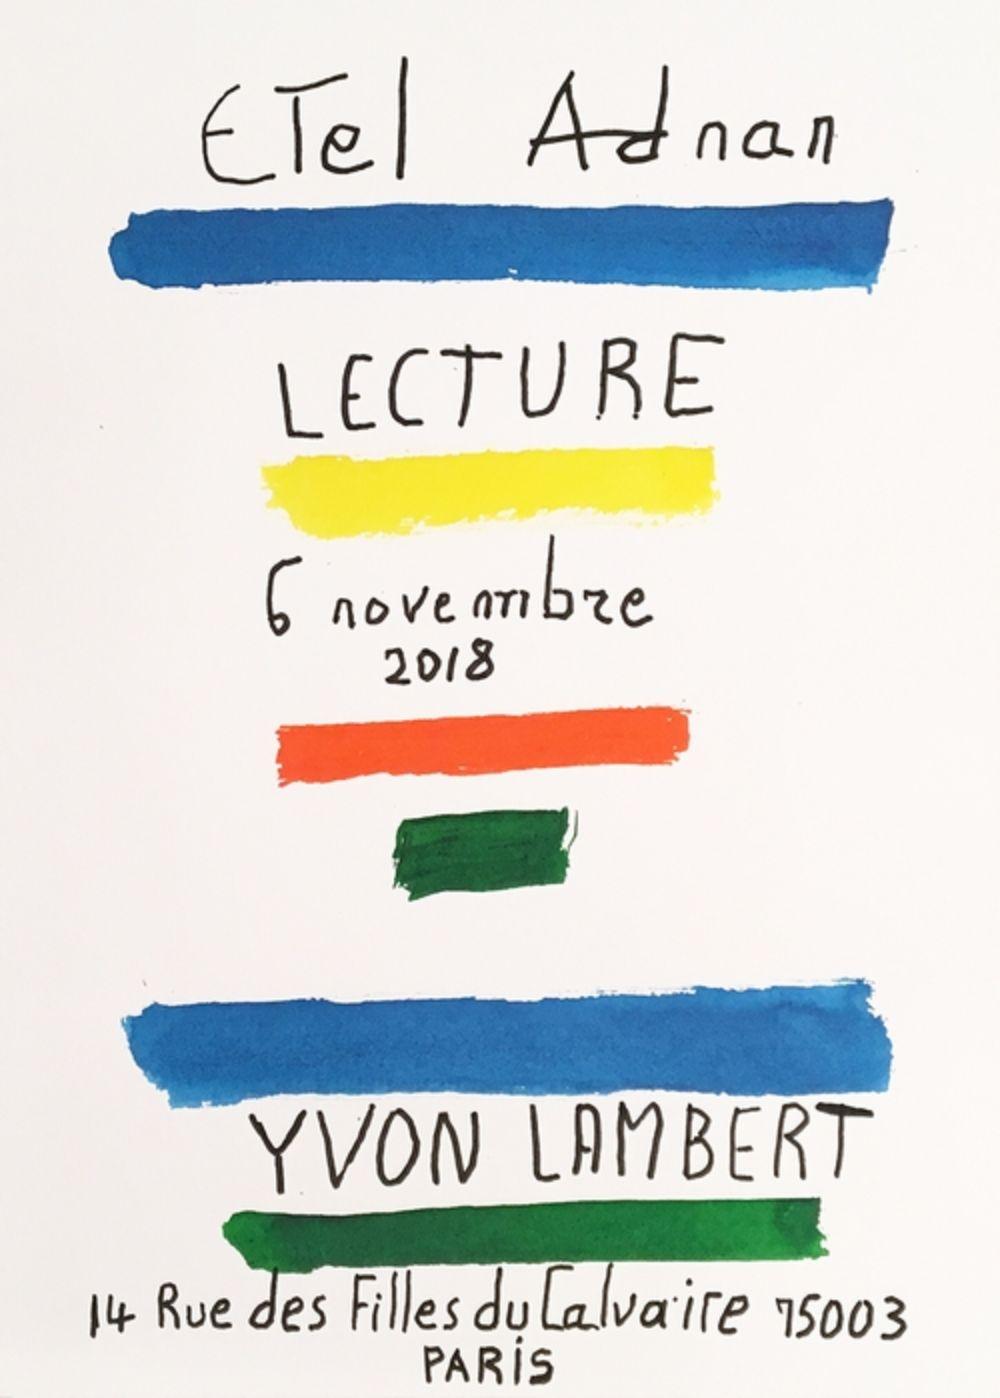 Original poster designed by Etel Adnan at the occasion of her reading
Published by Librairie Yvon Lambert
Year: 2018
Medium: Poster / Ephemera
Material: Offset lithograph print
Size: 18.11 x 12.99 inches (46 x 33 cm)

Poster is sold unframed. Ship